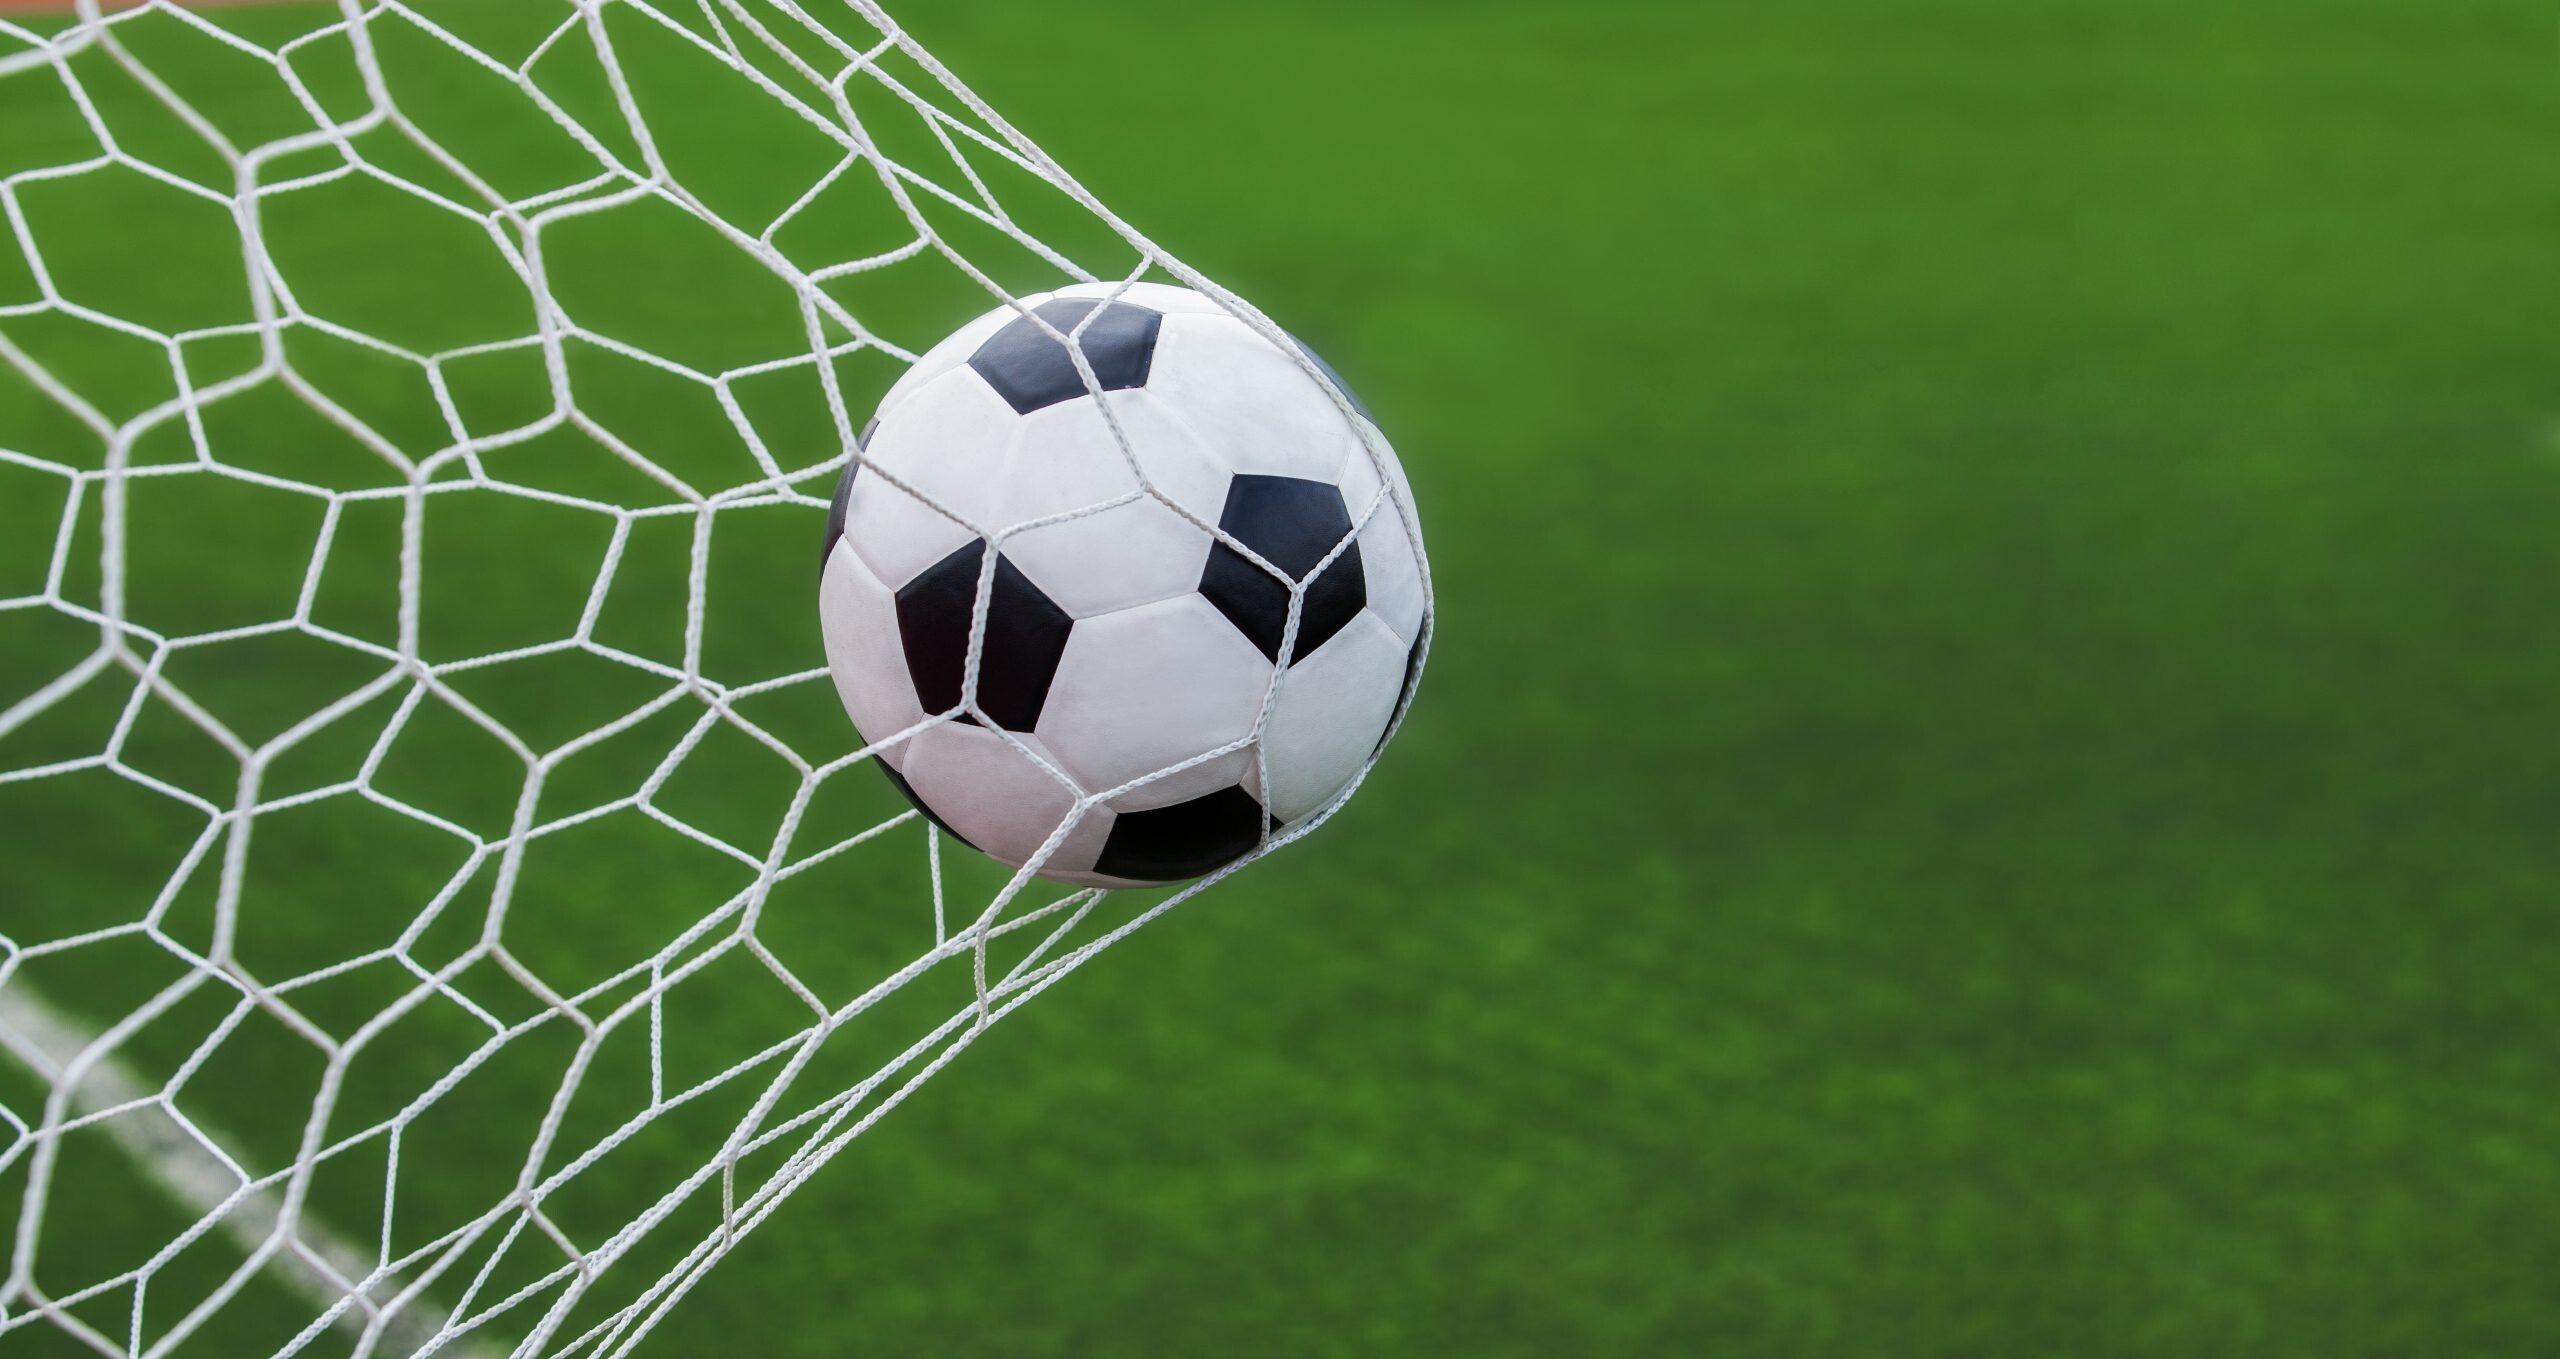 Goal (Sports): Football goal post nets, Made to be hung behind the goal post to catch the footballs when kicked. 2560x1360 HD Wallpaper.